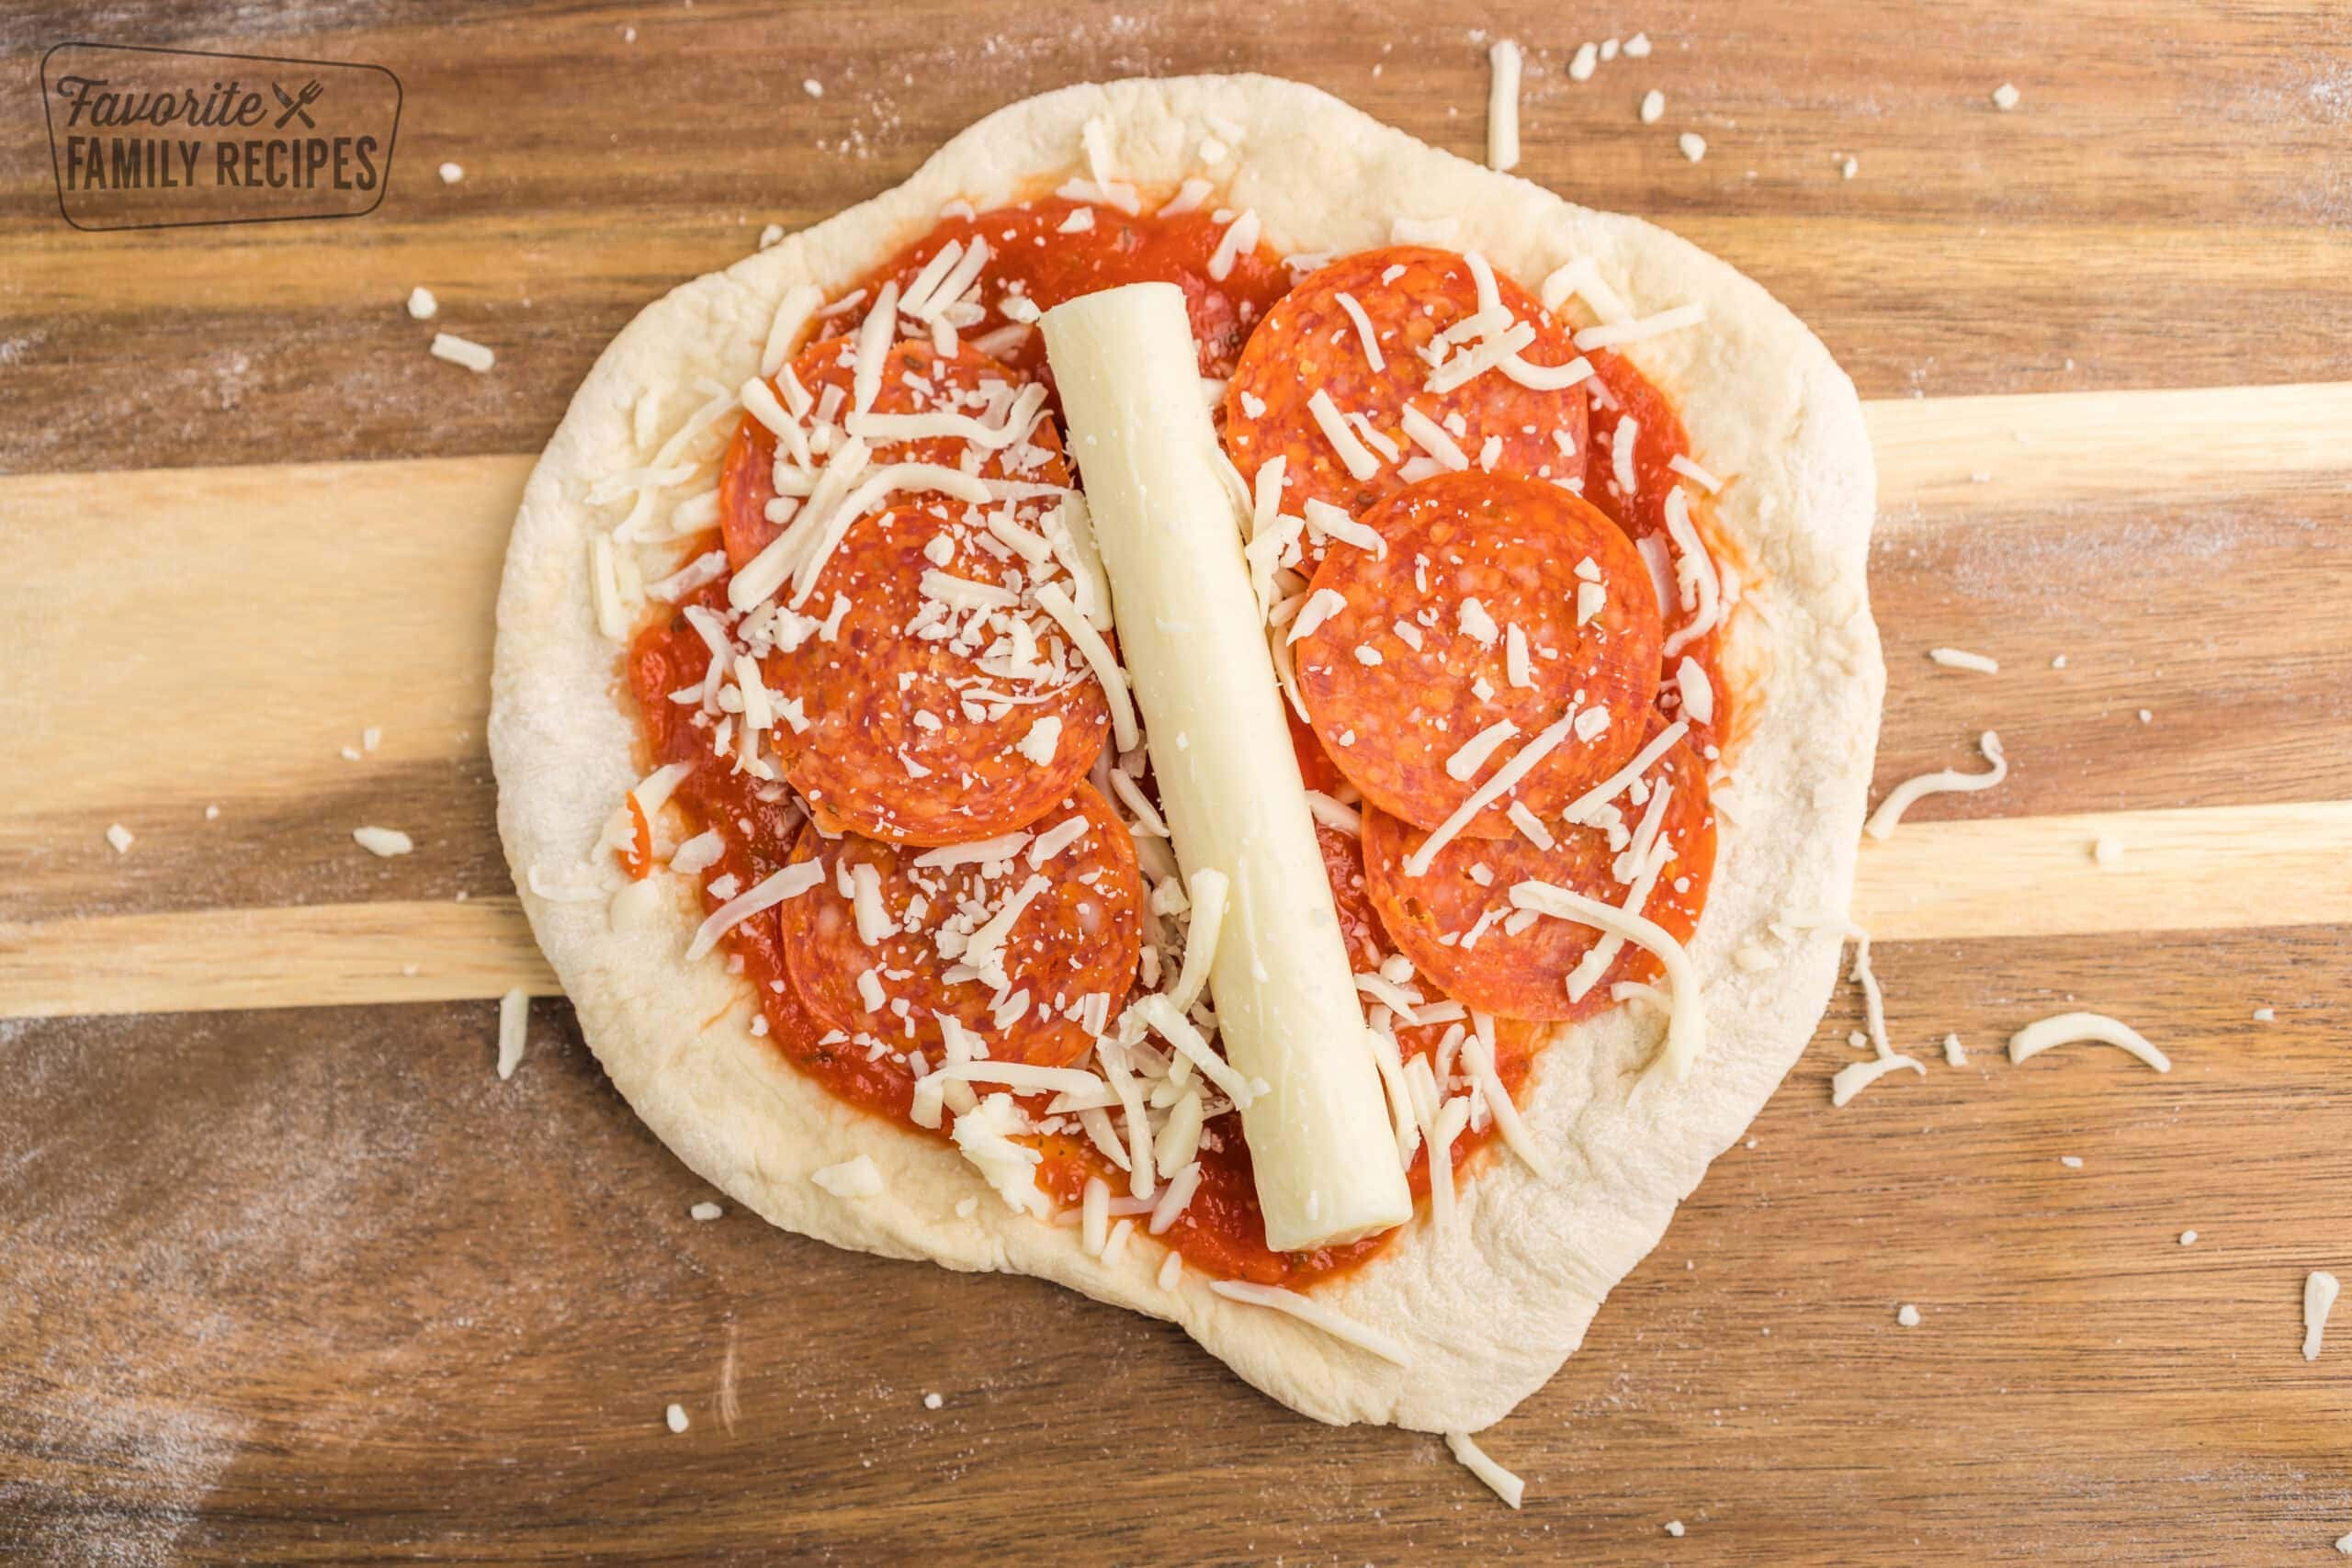 Pizza toppings inside a circle of pizza dough